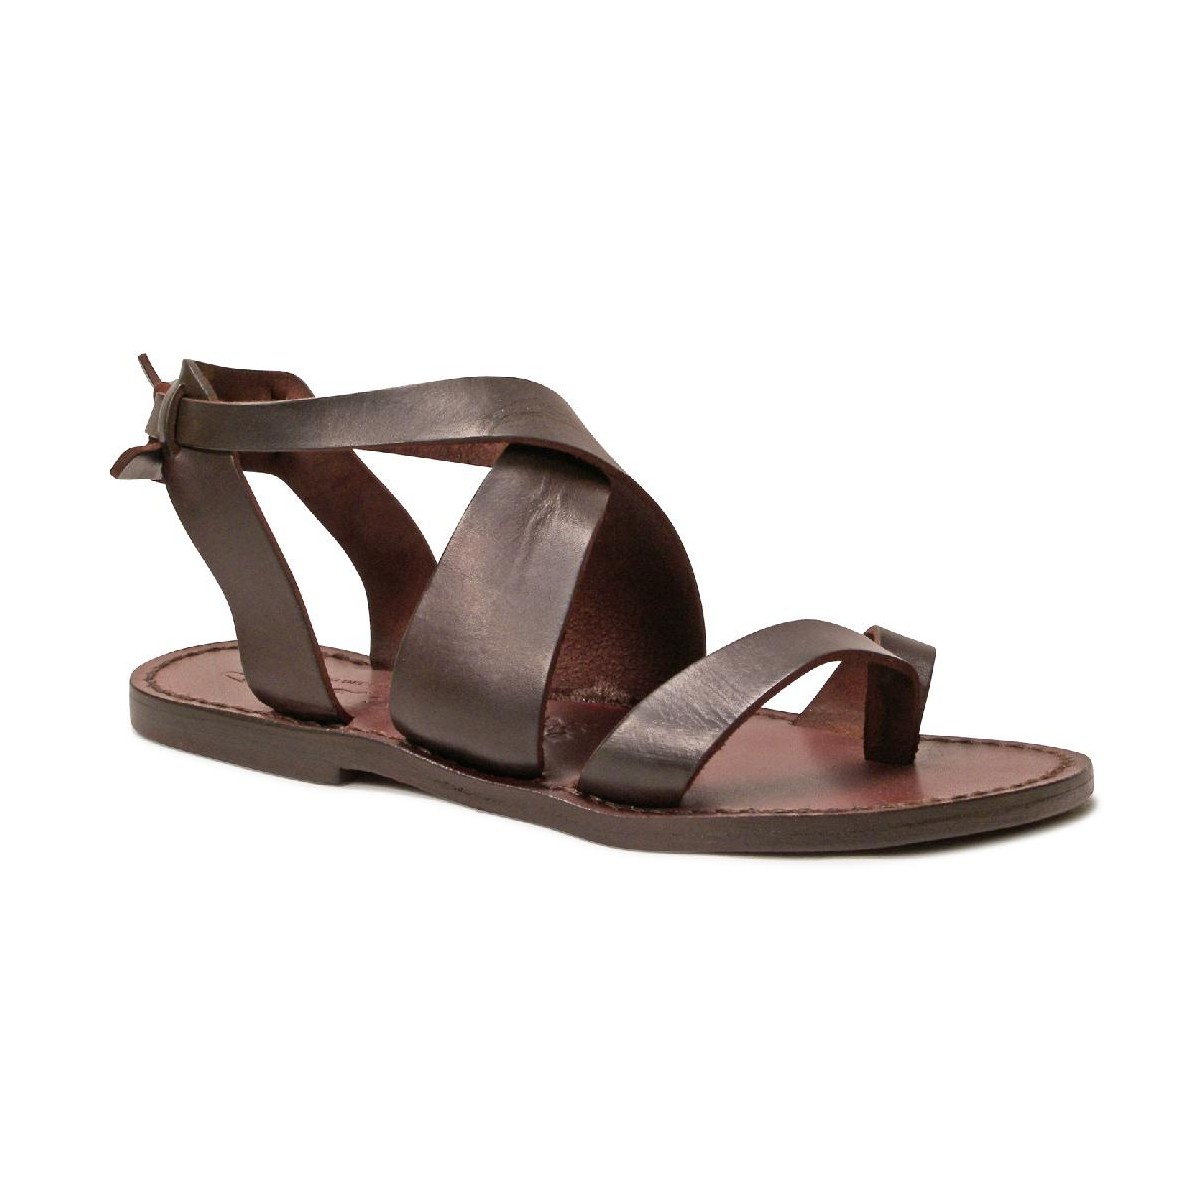 Women sandals in Dark Brown Leather handmade in Italy | The leather ...